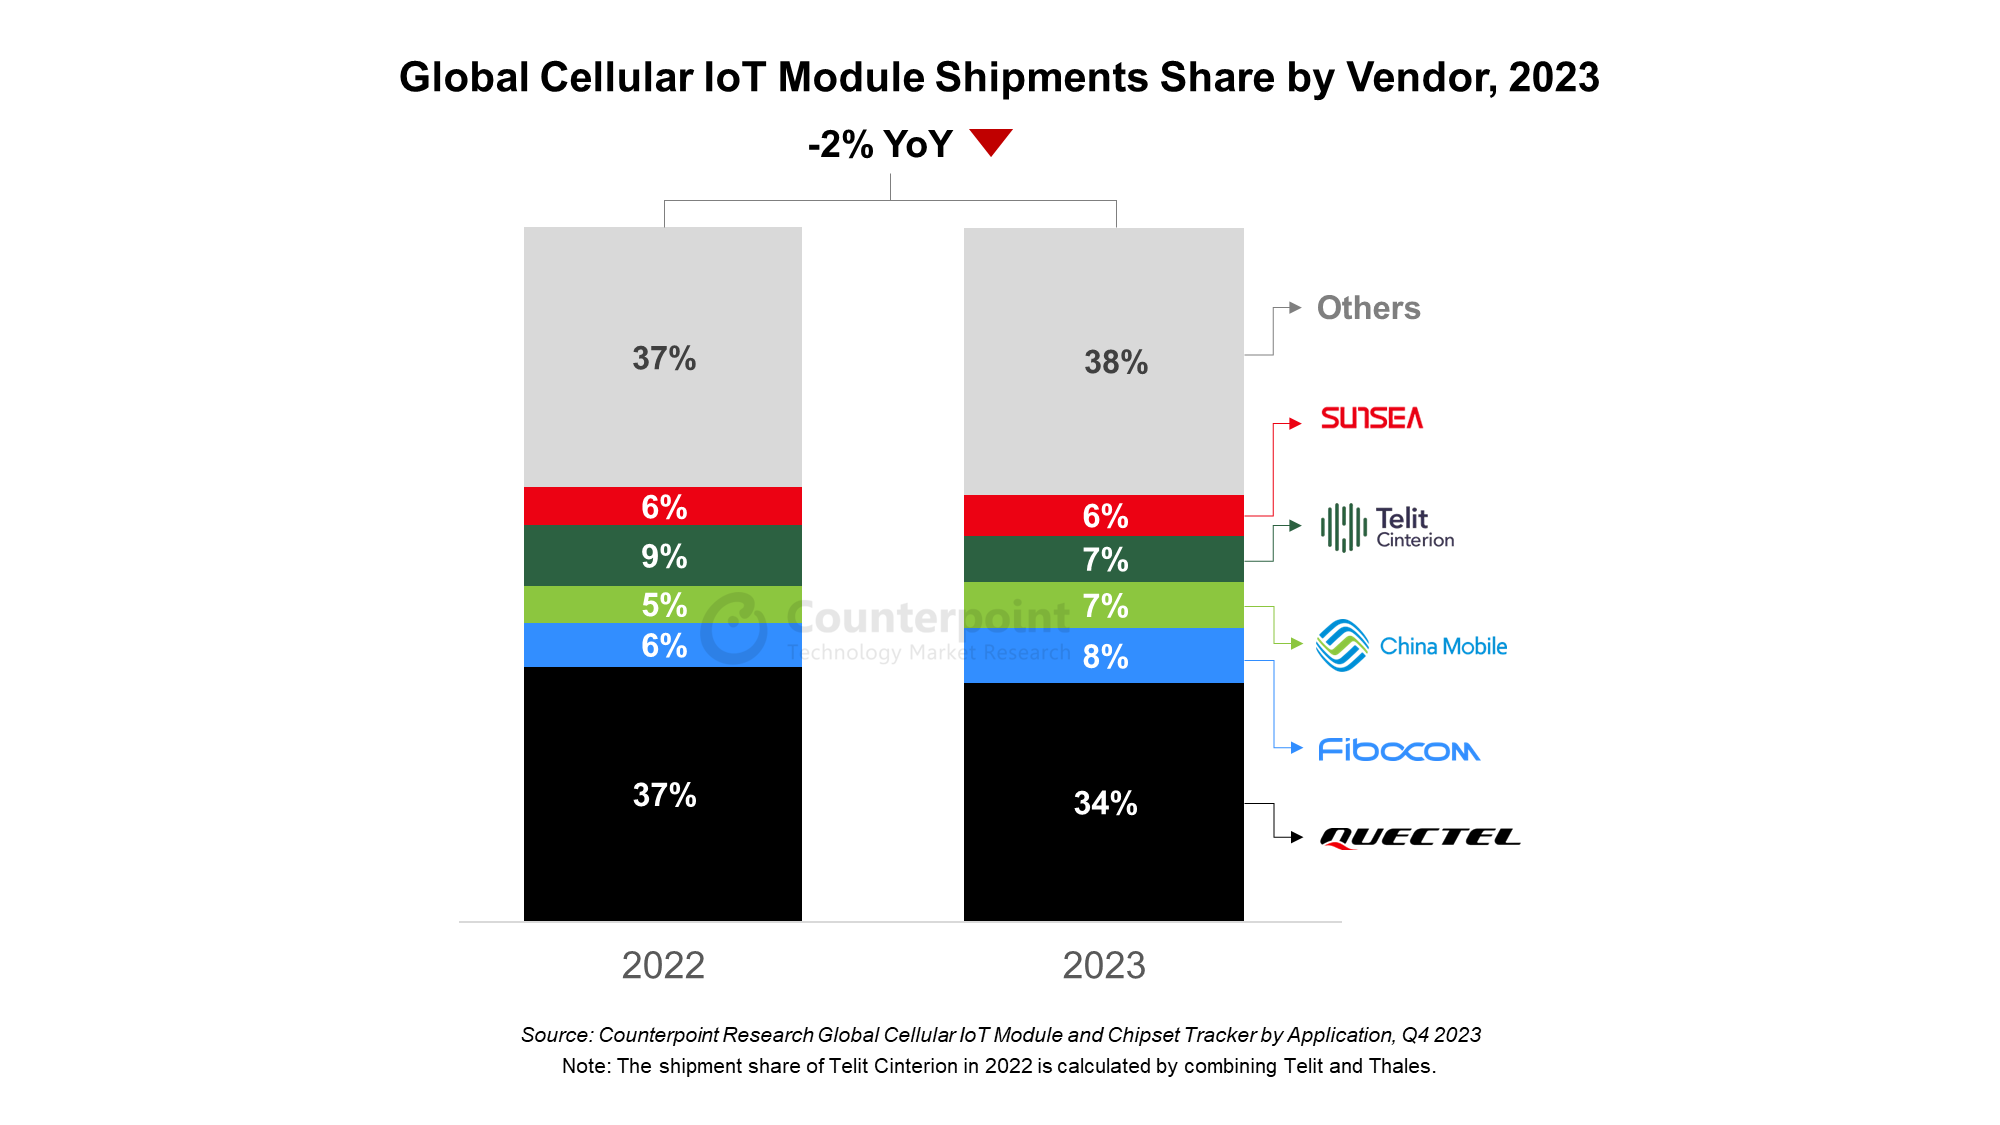 Counterpoint Research IoT Module Shipments Share 2023